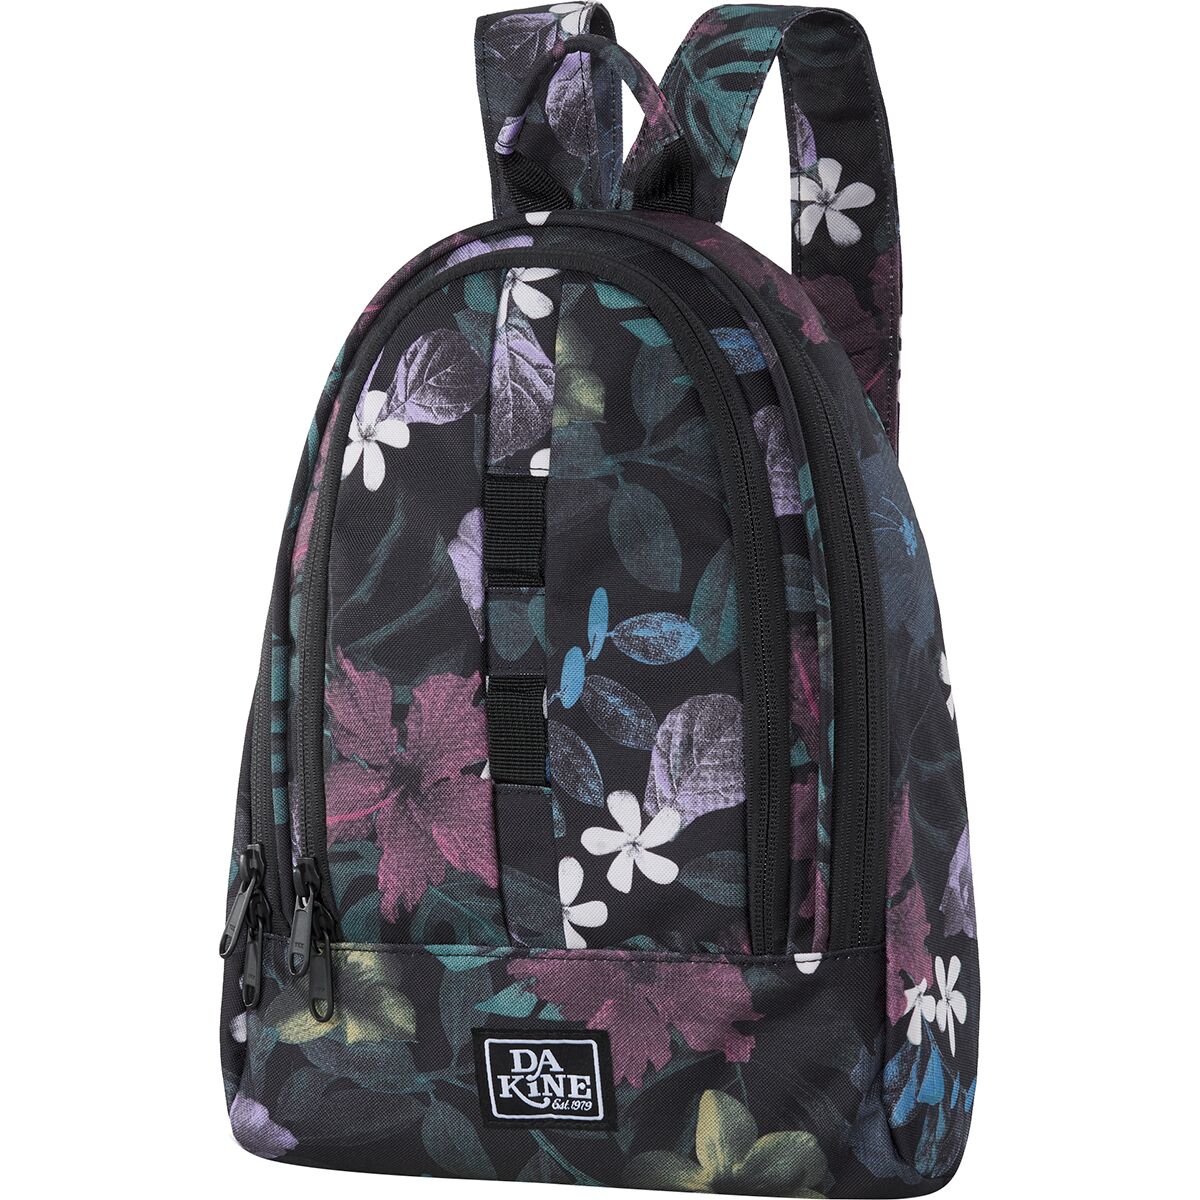 Cosmo 6.5L Backpack - Women